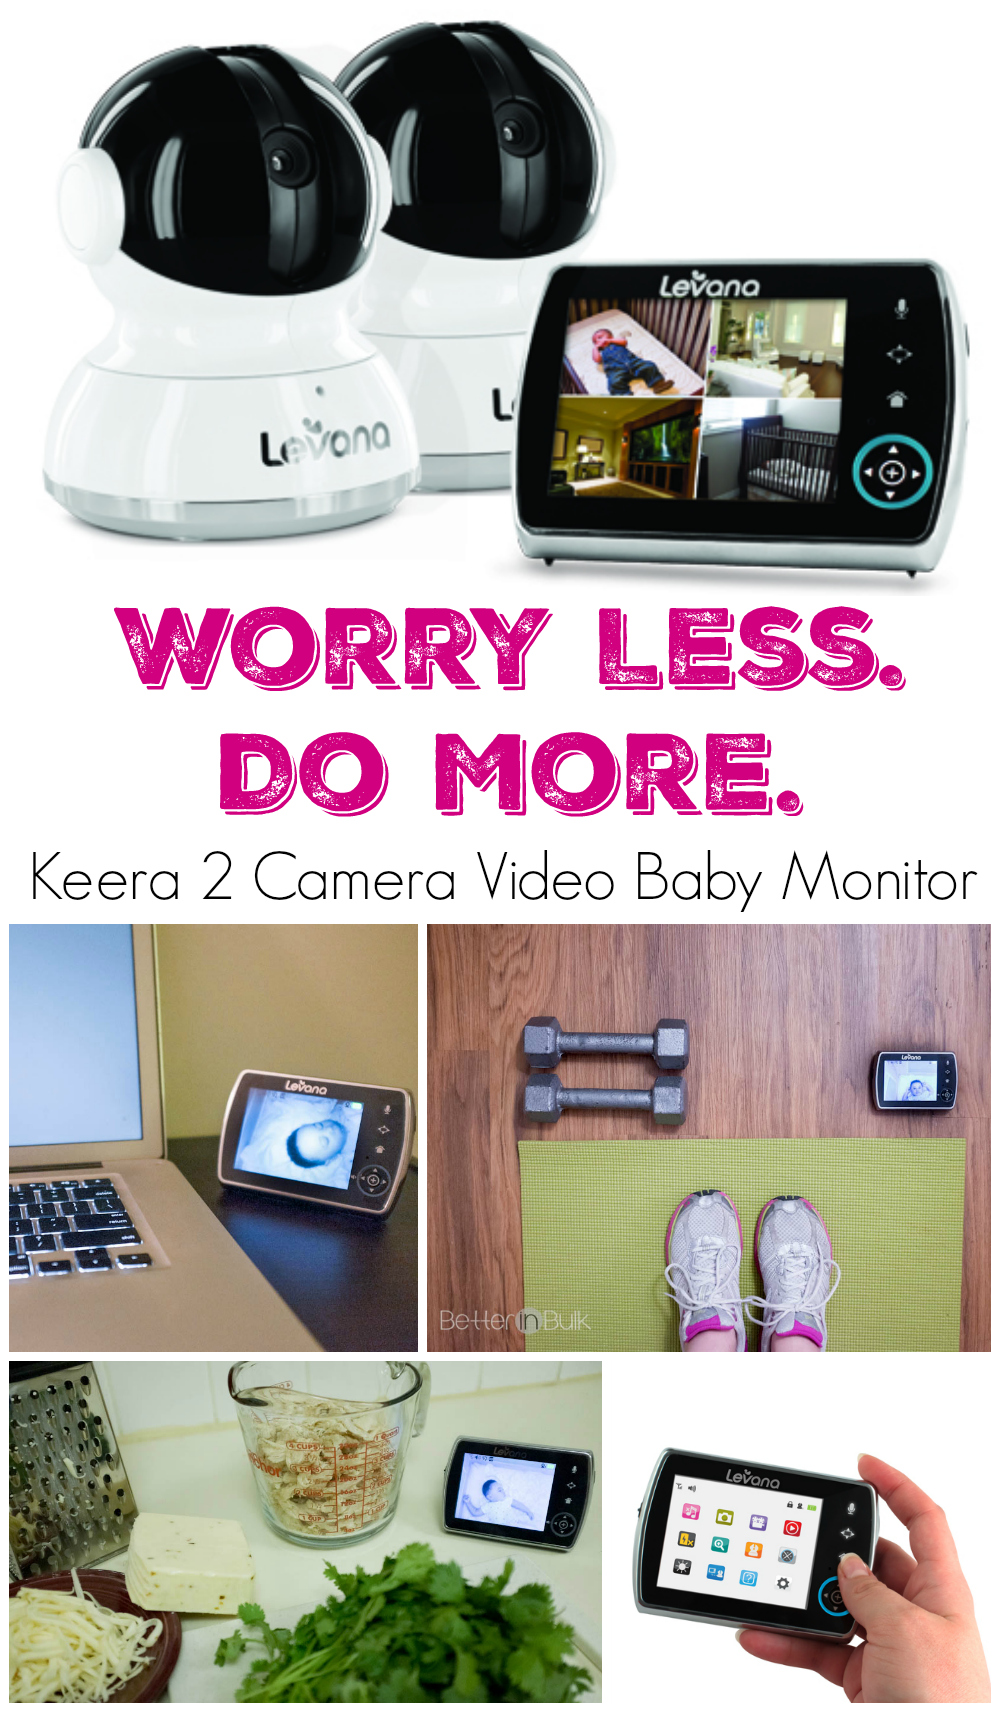 Worry Less. Do More. Keera 2 Camera Video Baby Monitor